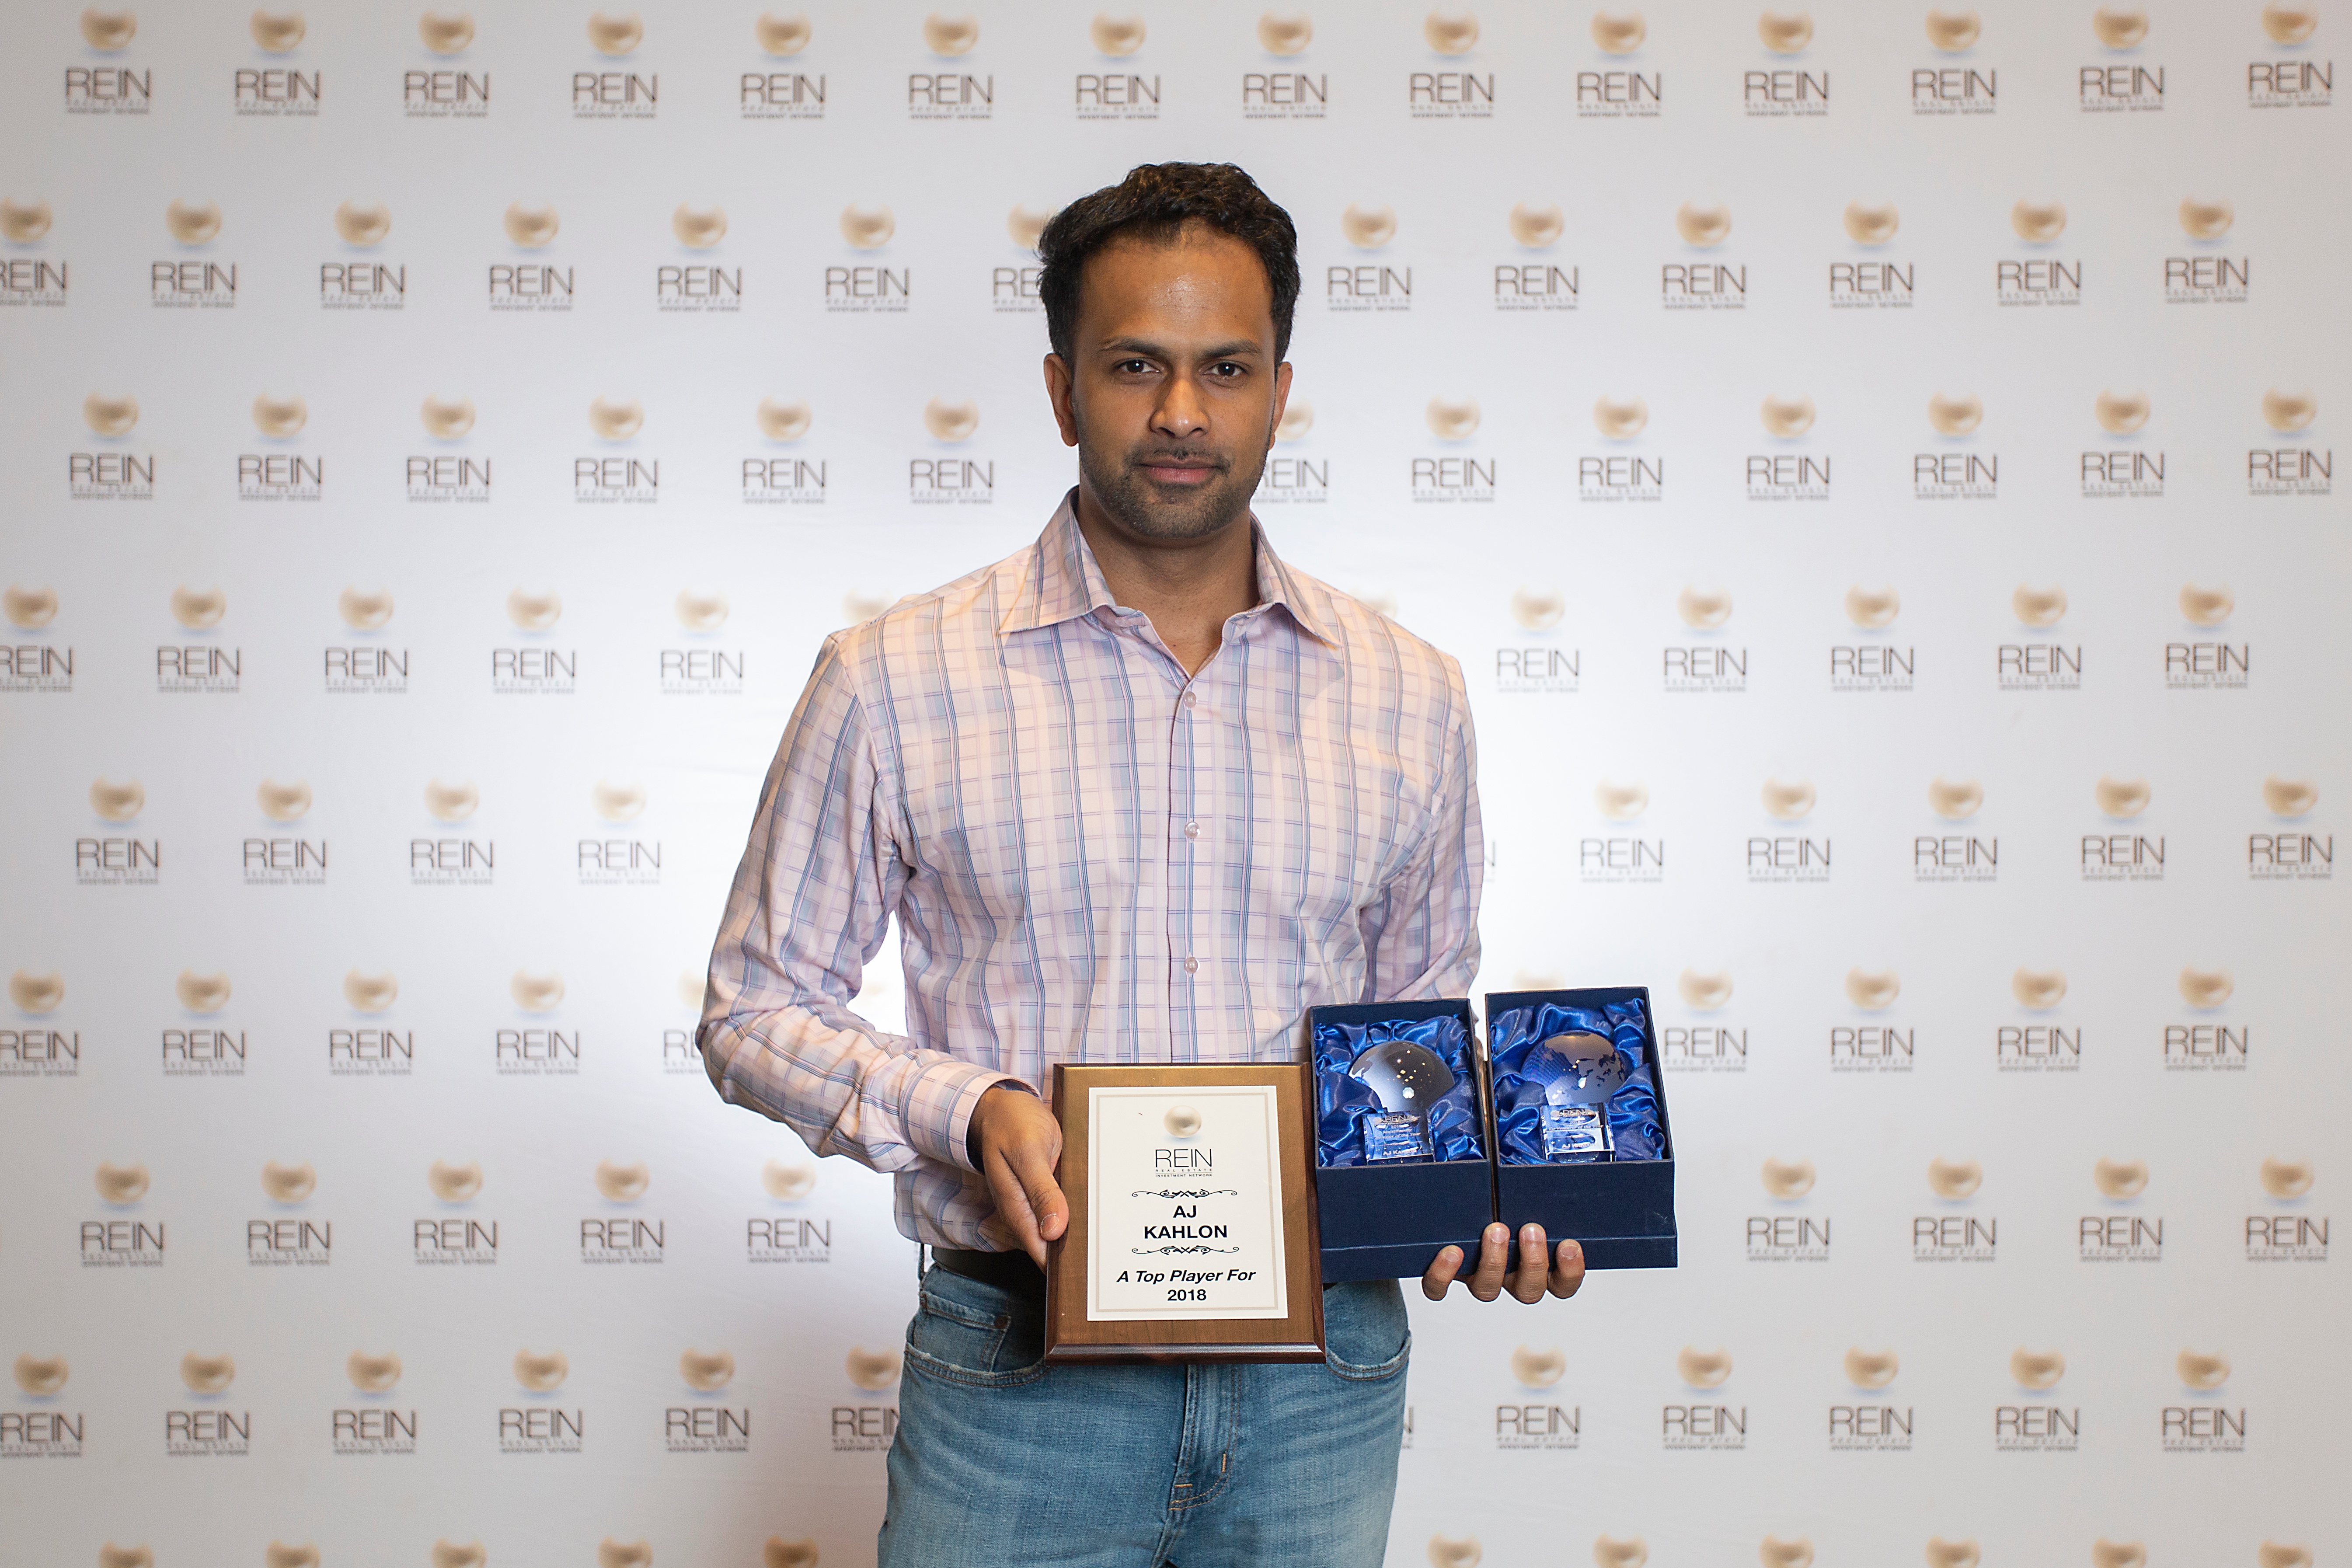 AJ Kahlon - TOR 2018 Co-Venturer of the Year, 2018 Multi-Family Investor of the Year, A Top Player for 2018